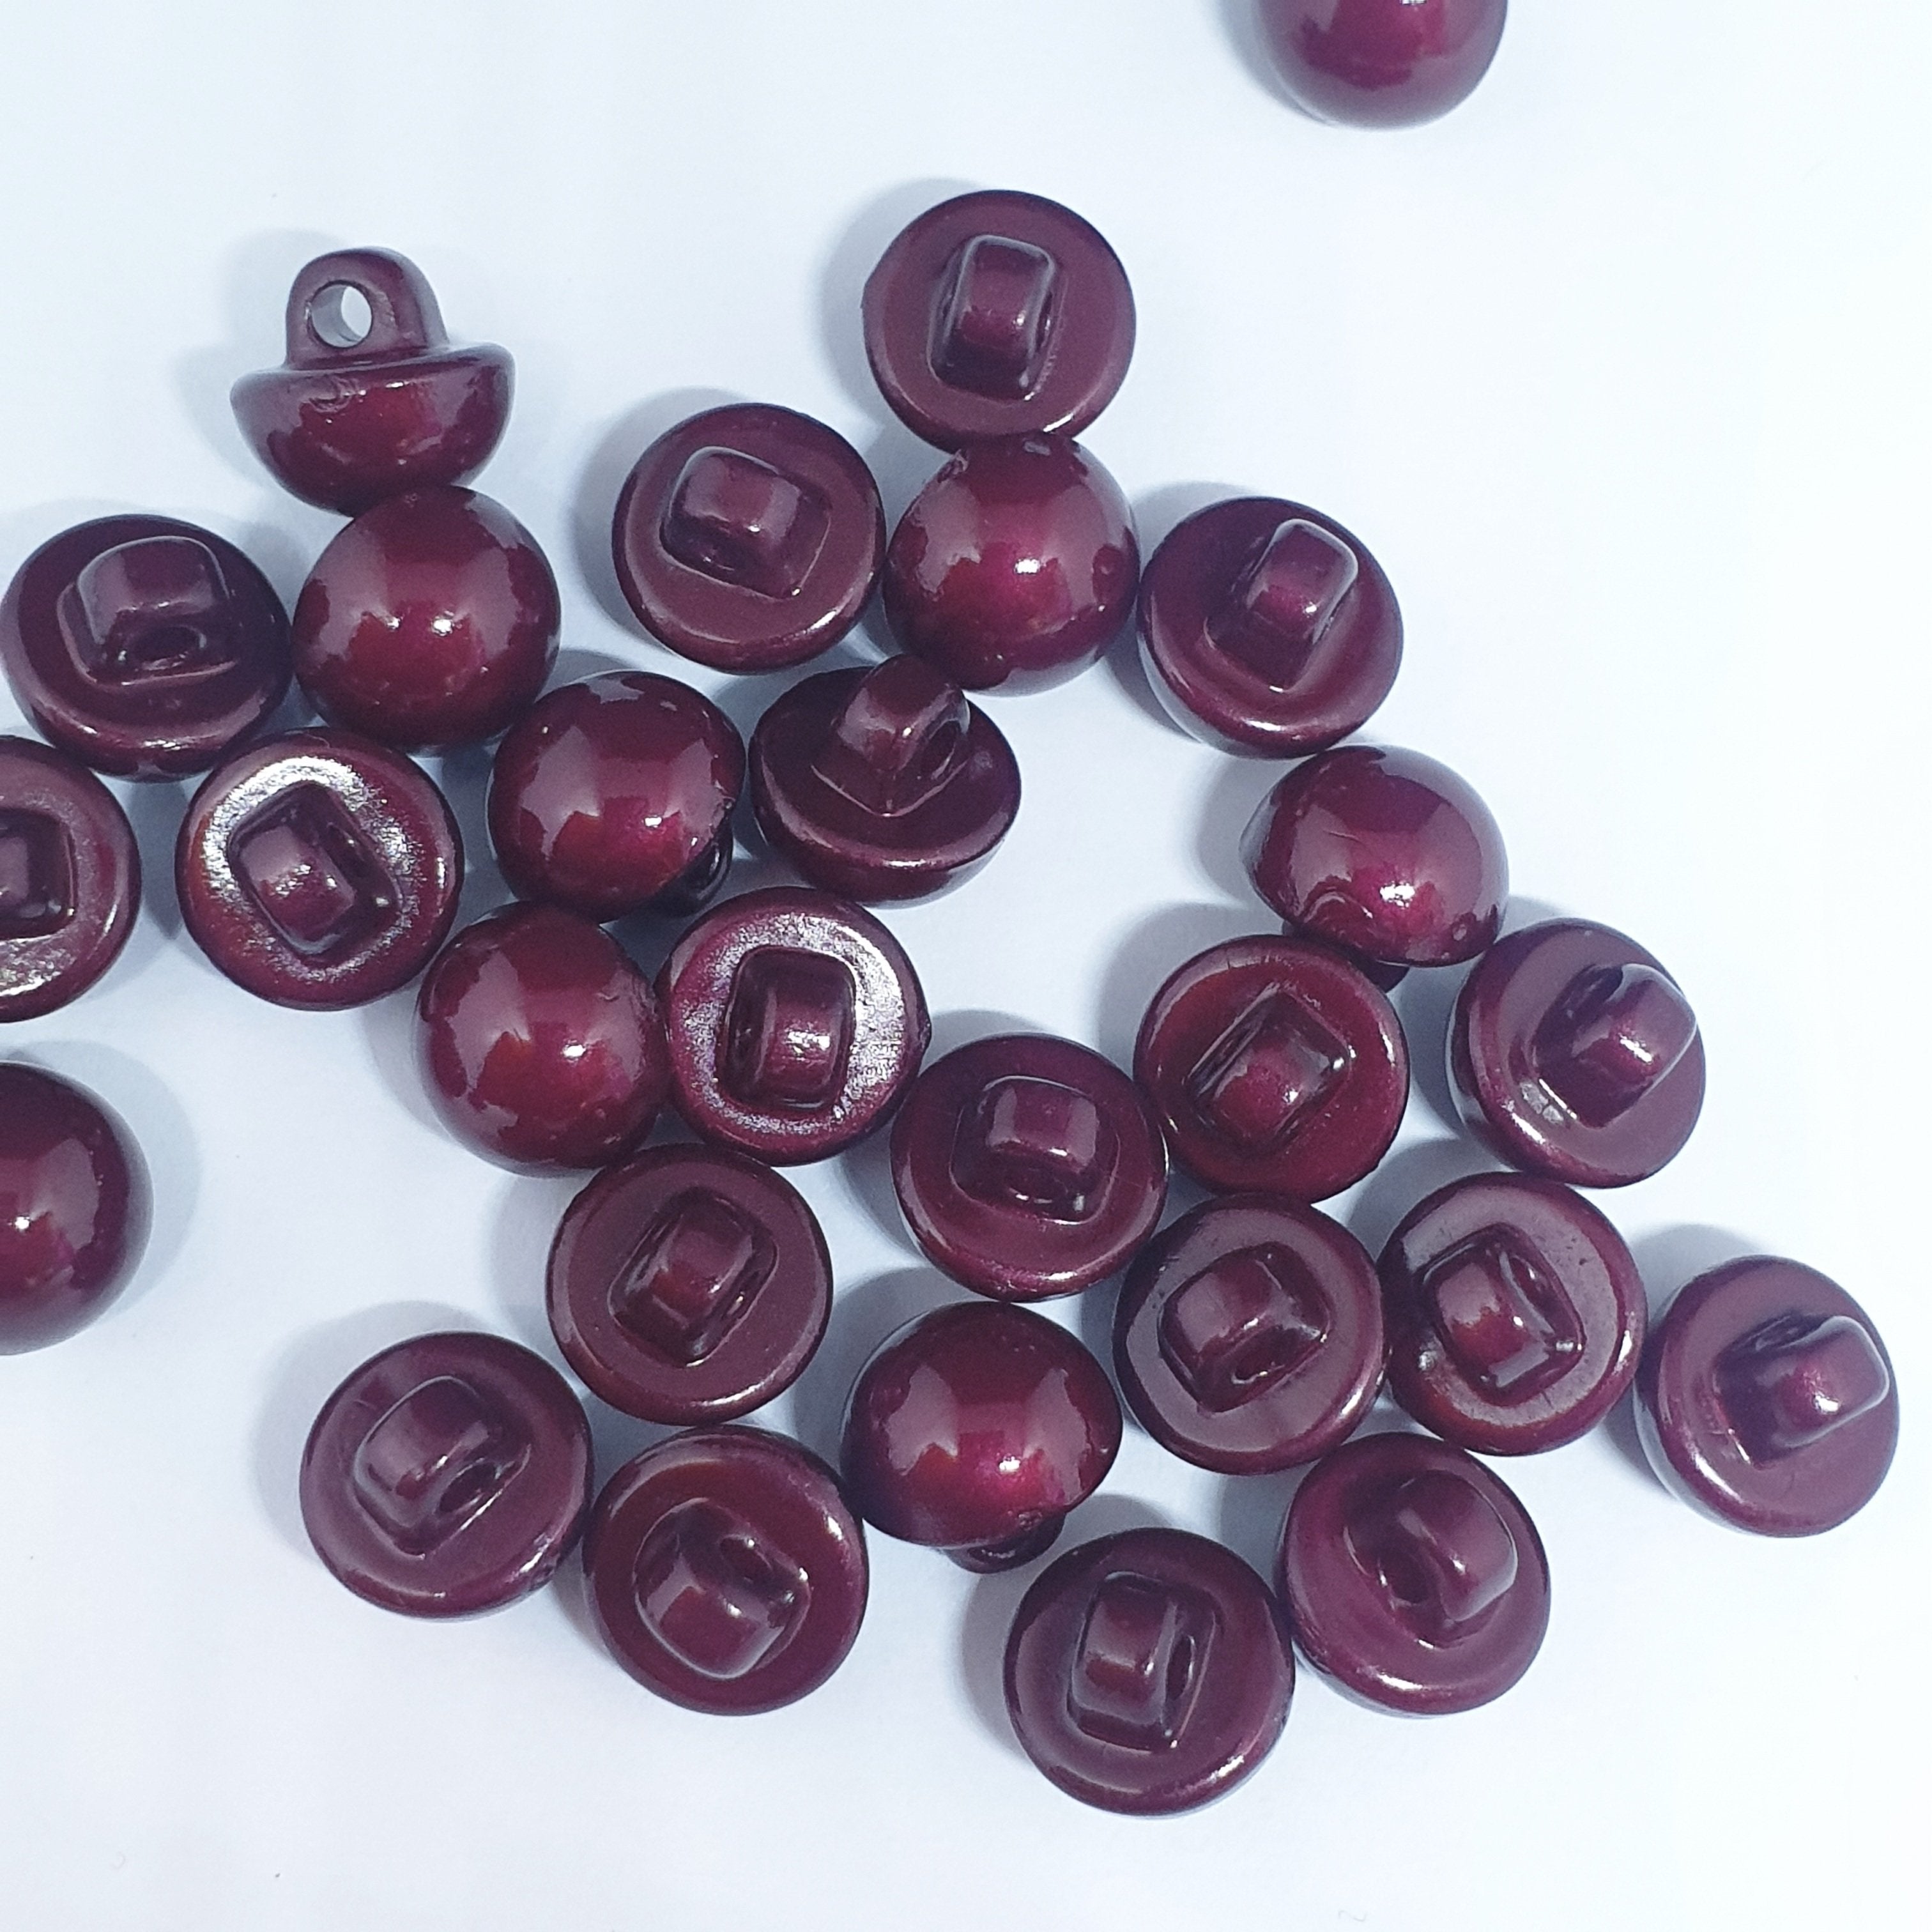 MajorCrafts 30pcs 10mm Burgundy Red High-Grade Acrylic Small Round Sewing Mushroom Shank Buttons